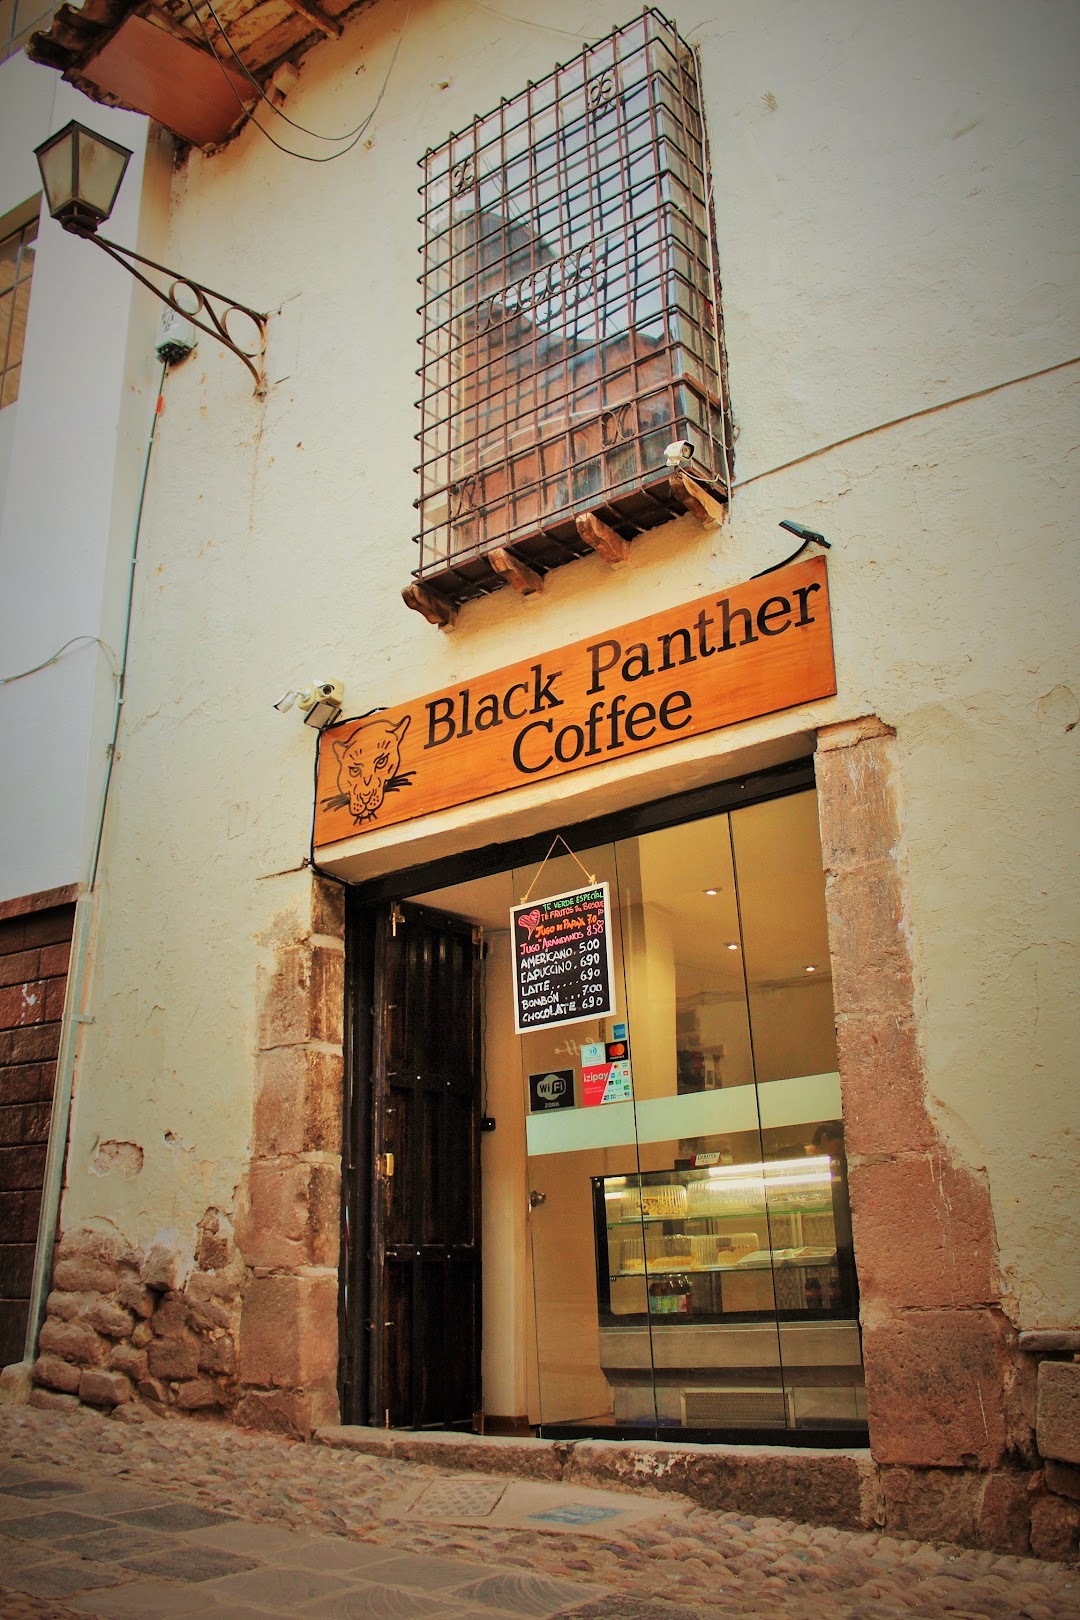 Black Panther Coffee Co